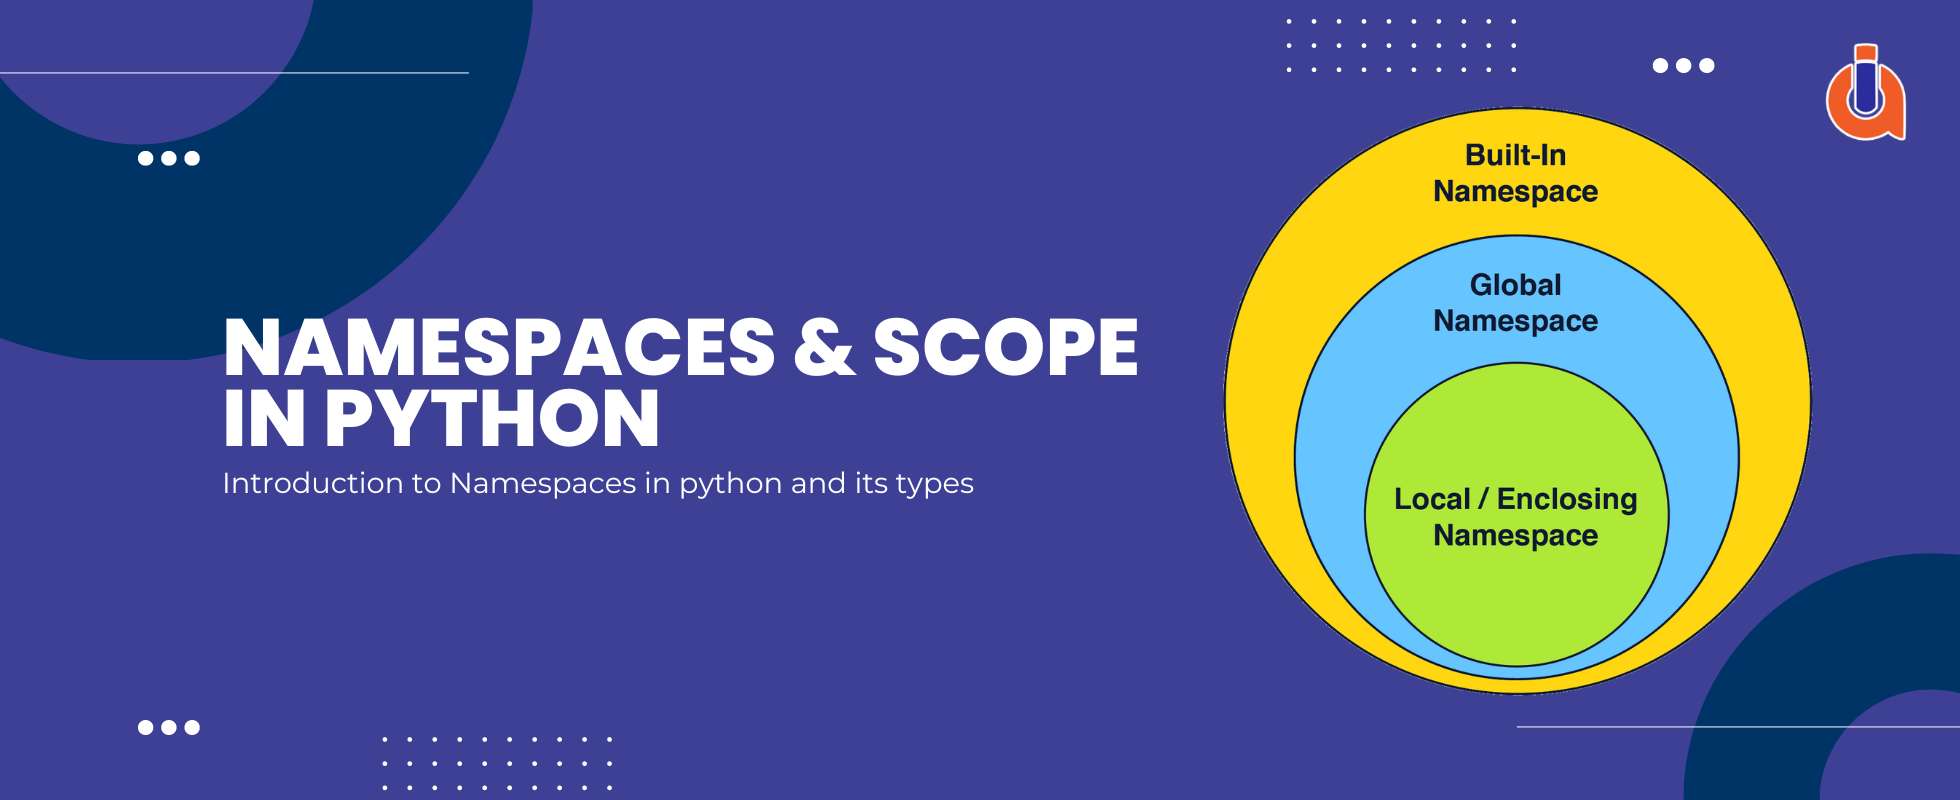 namespaces and scope in python